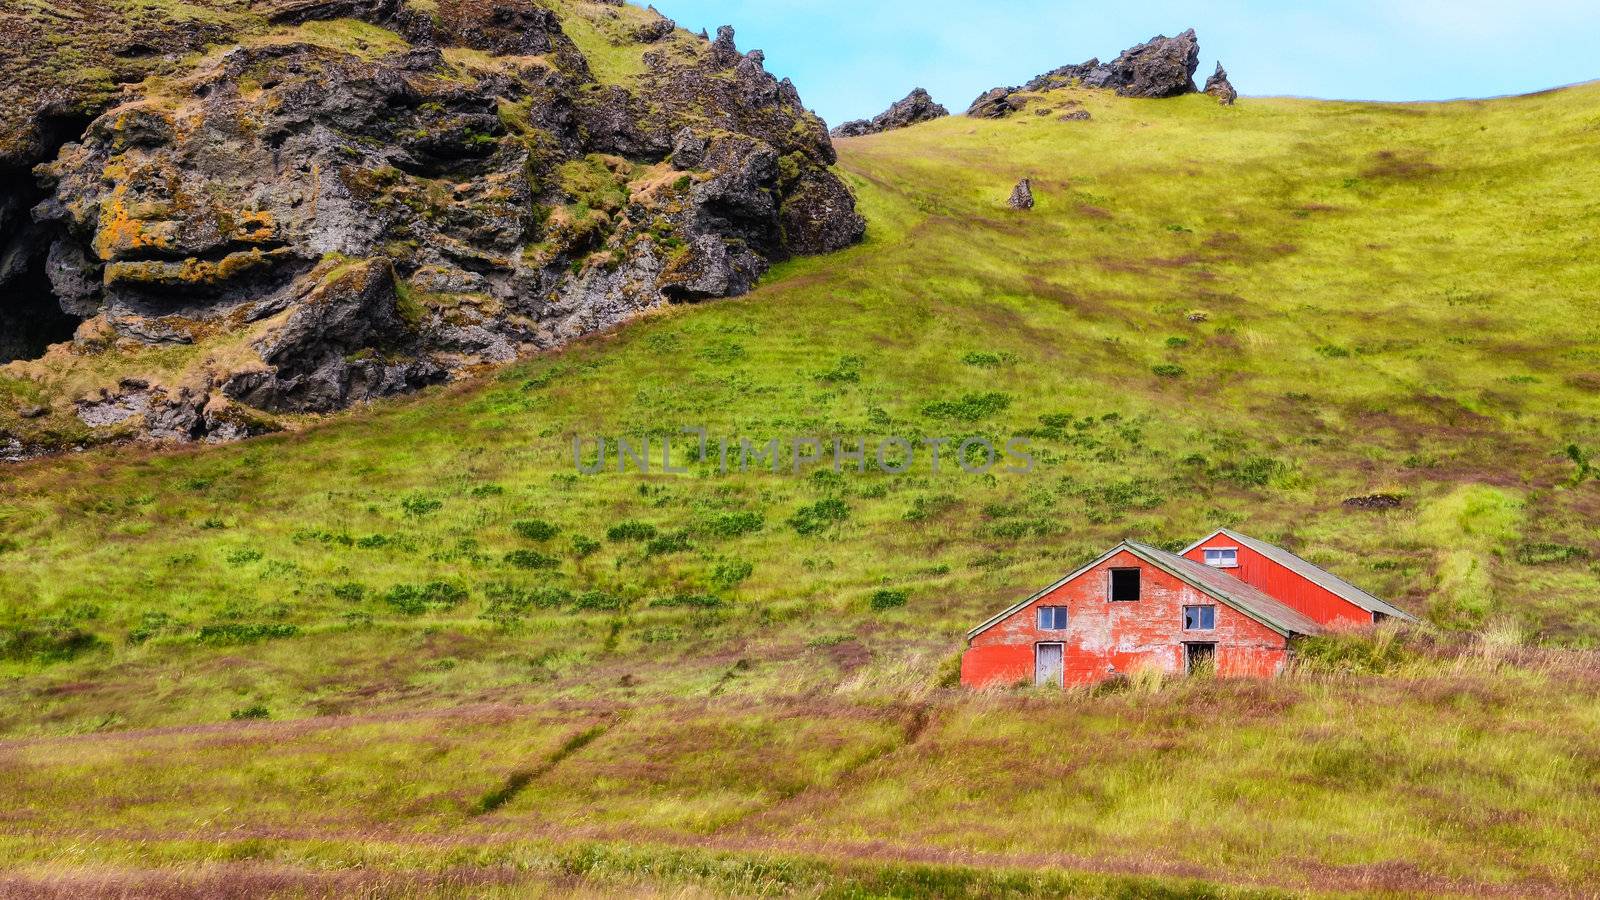 Old wooden red abandoned barn in green meadow, Iceland by martinm303